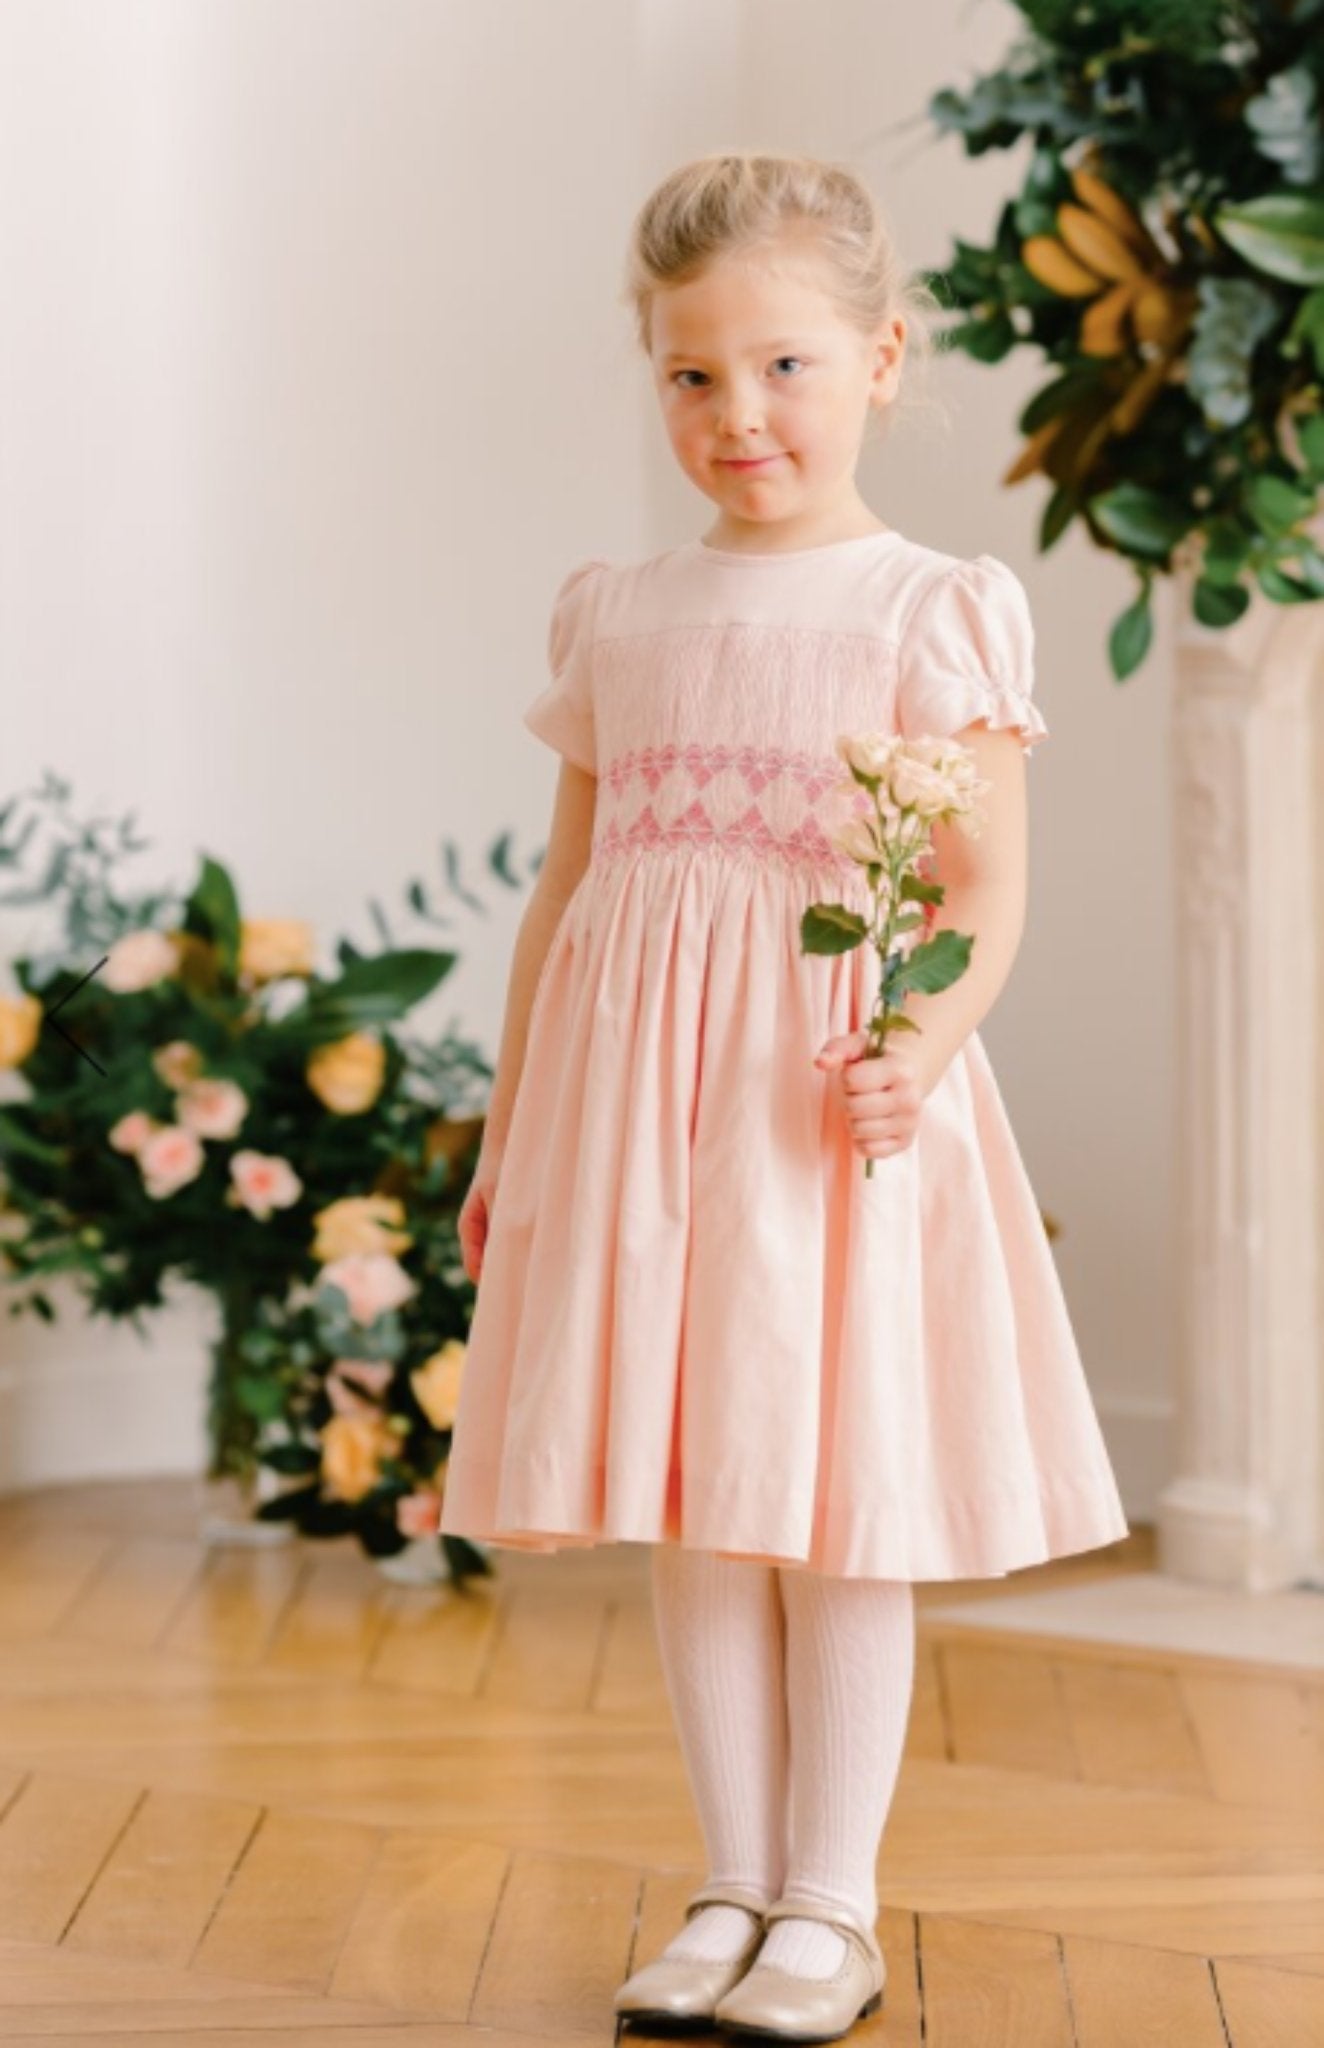 Pretty Baby Girl In Pink Dress Stock Photo, Picture and Royalty Free Image.  Image 30115481.